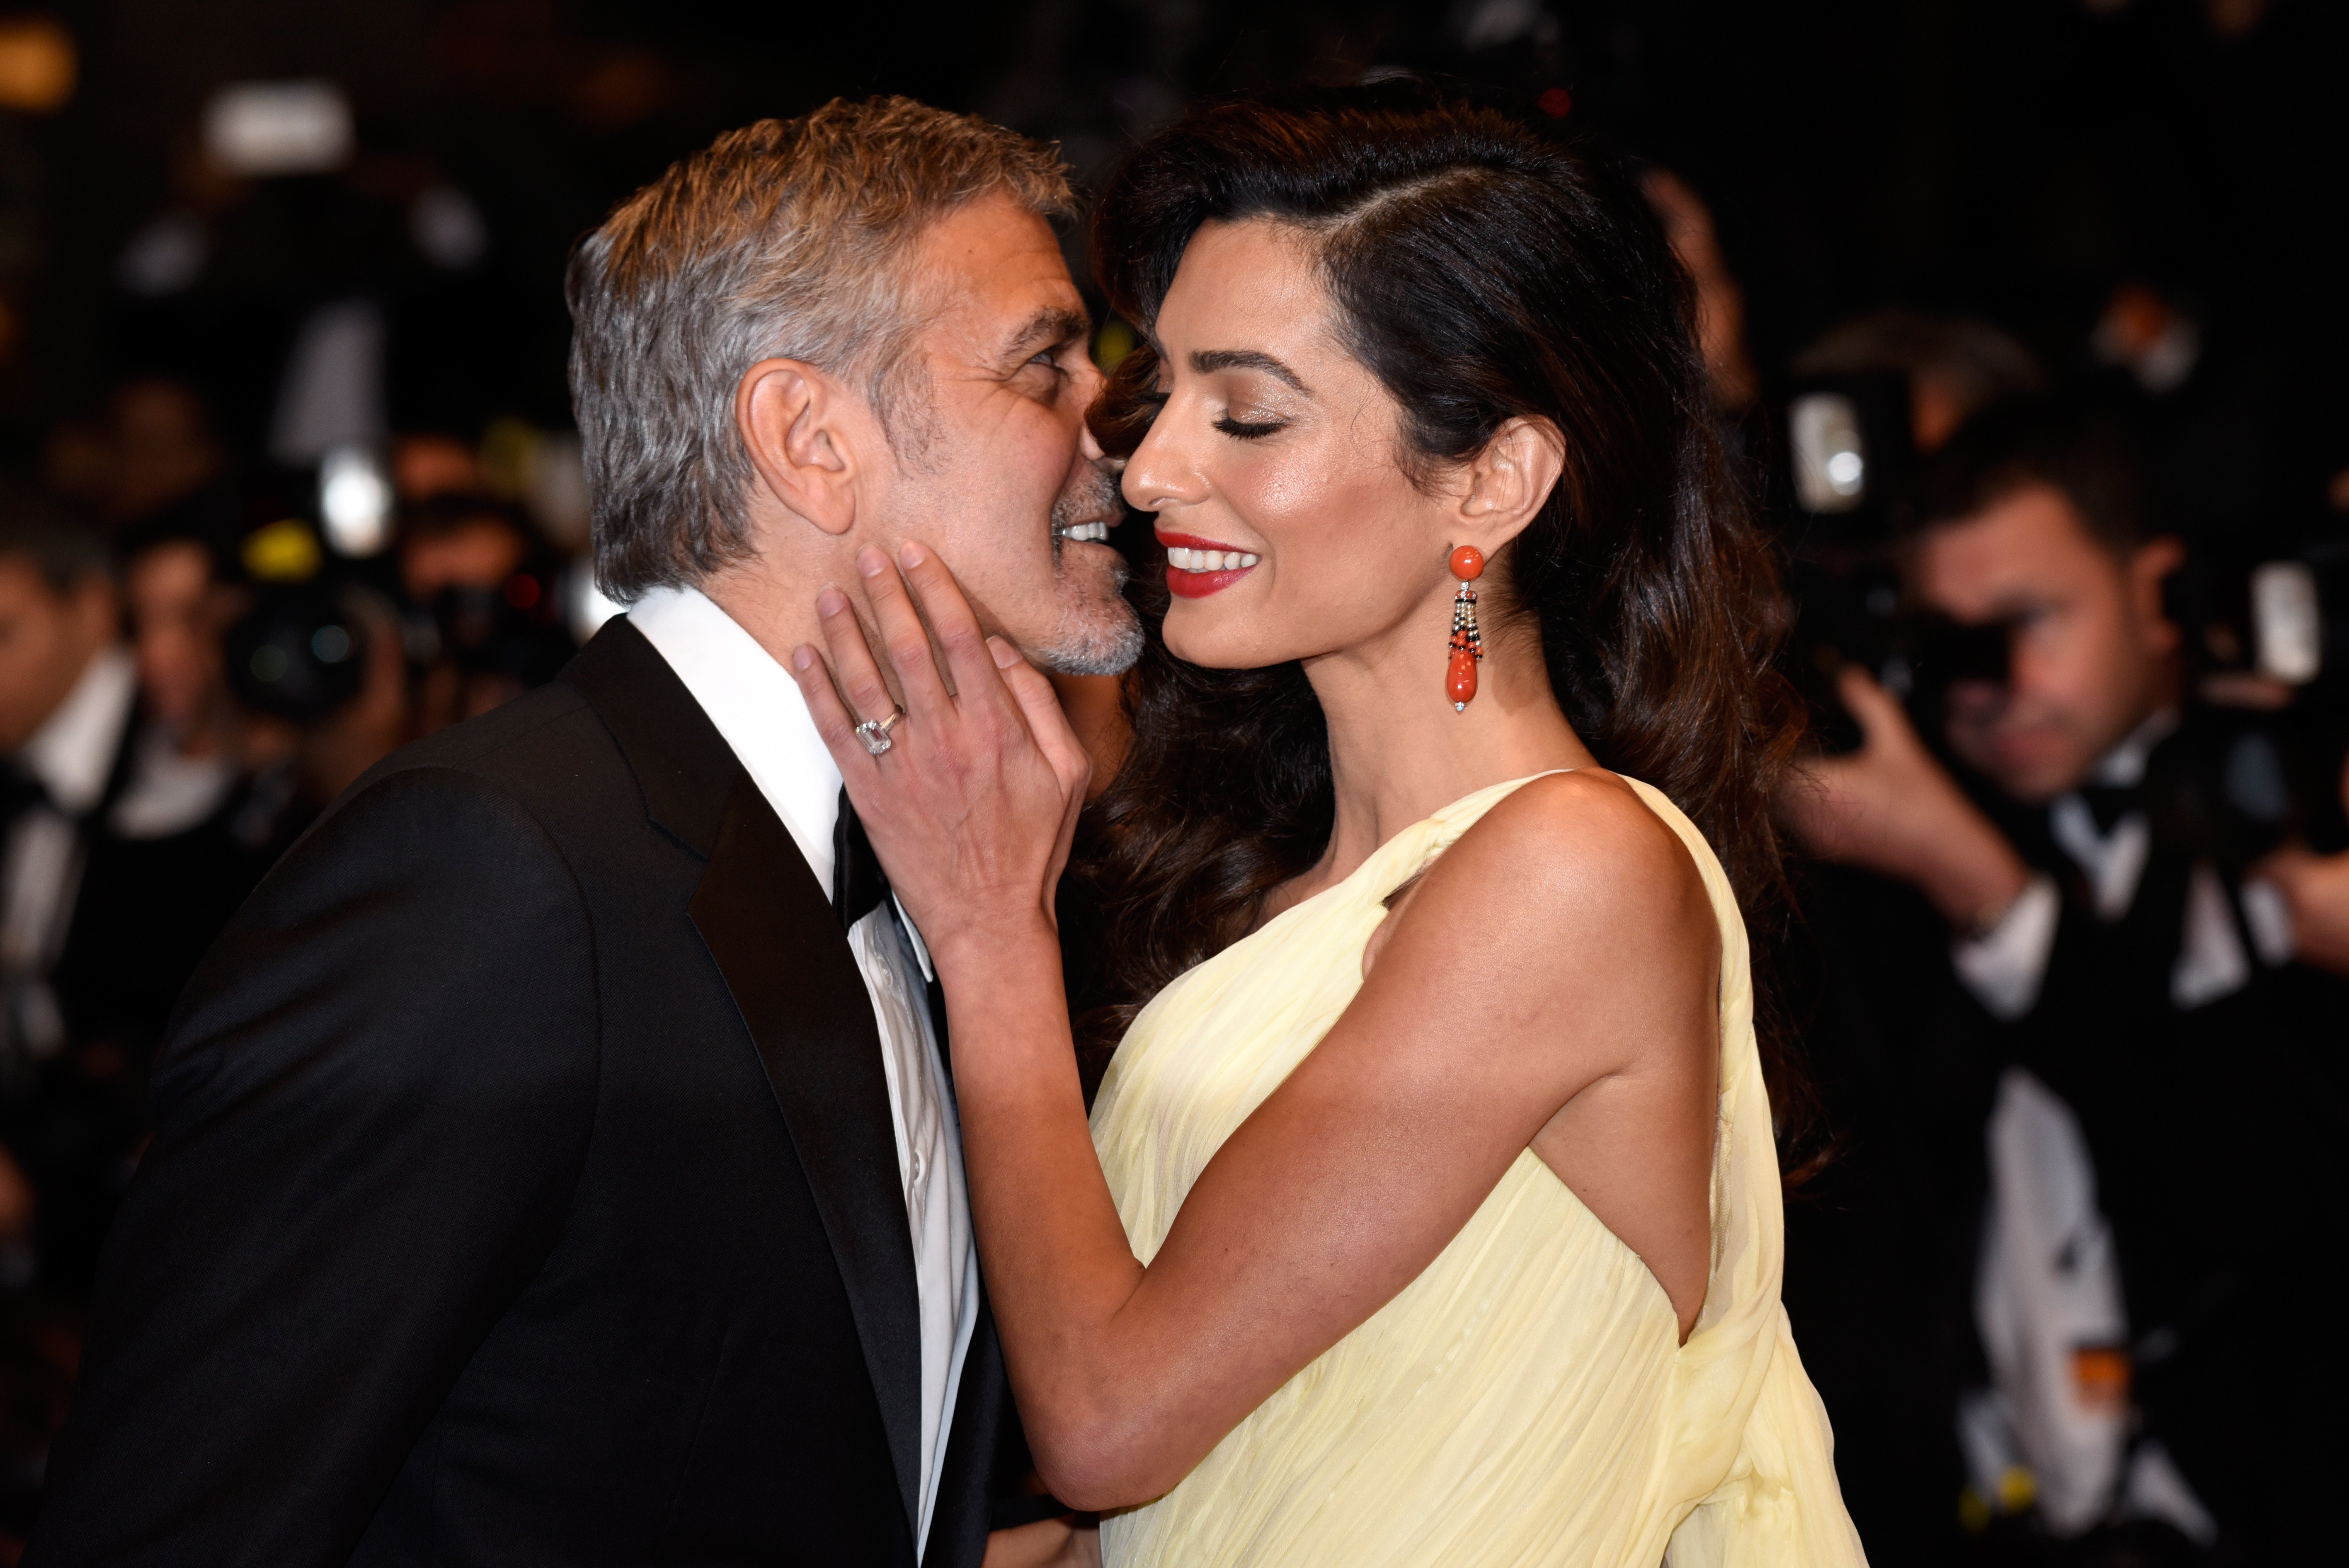 George Clooney and his wife Amal Clooney attend the "Money Monster" premiere during the 69th annual Cannes Film Festival at the Palais des Festivals on May 12, 2016 in Cannes, France | Source: Getty Images 